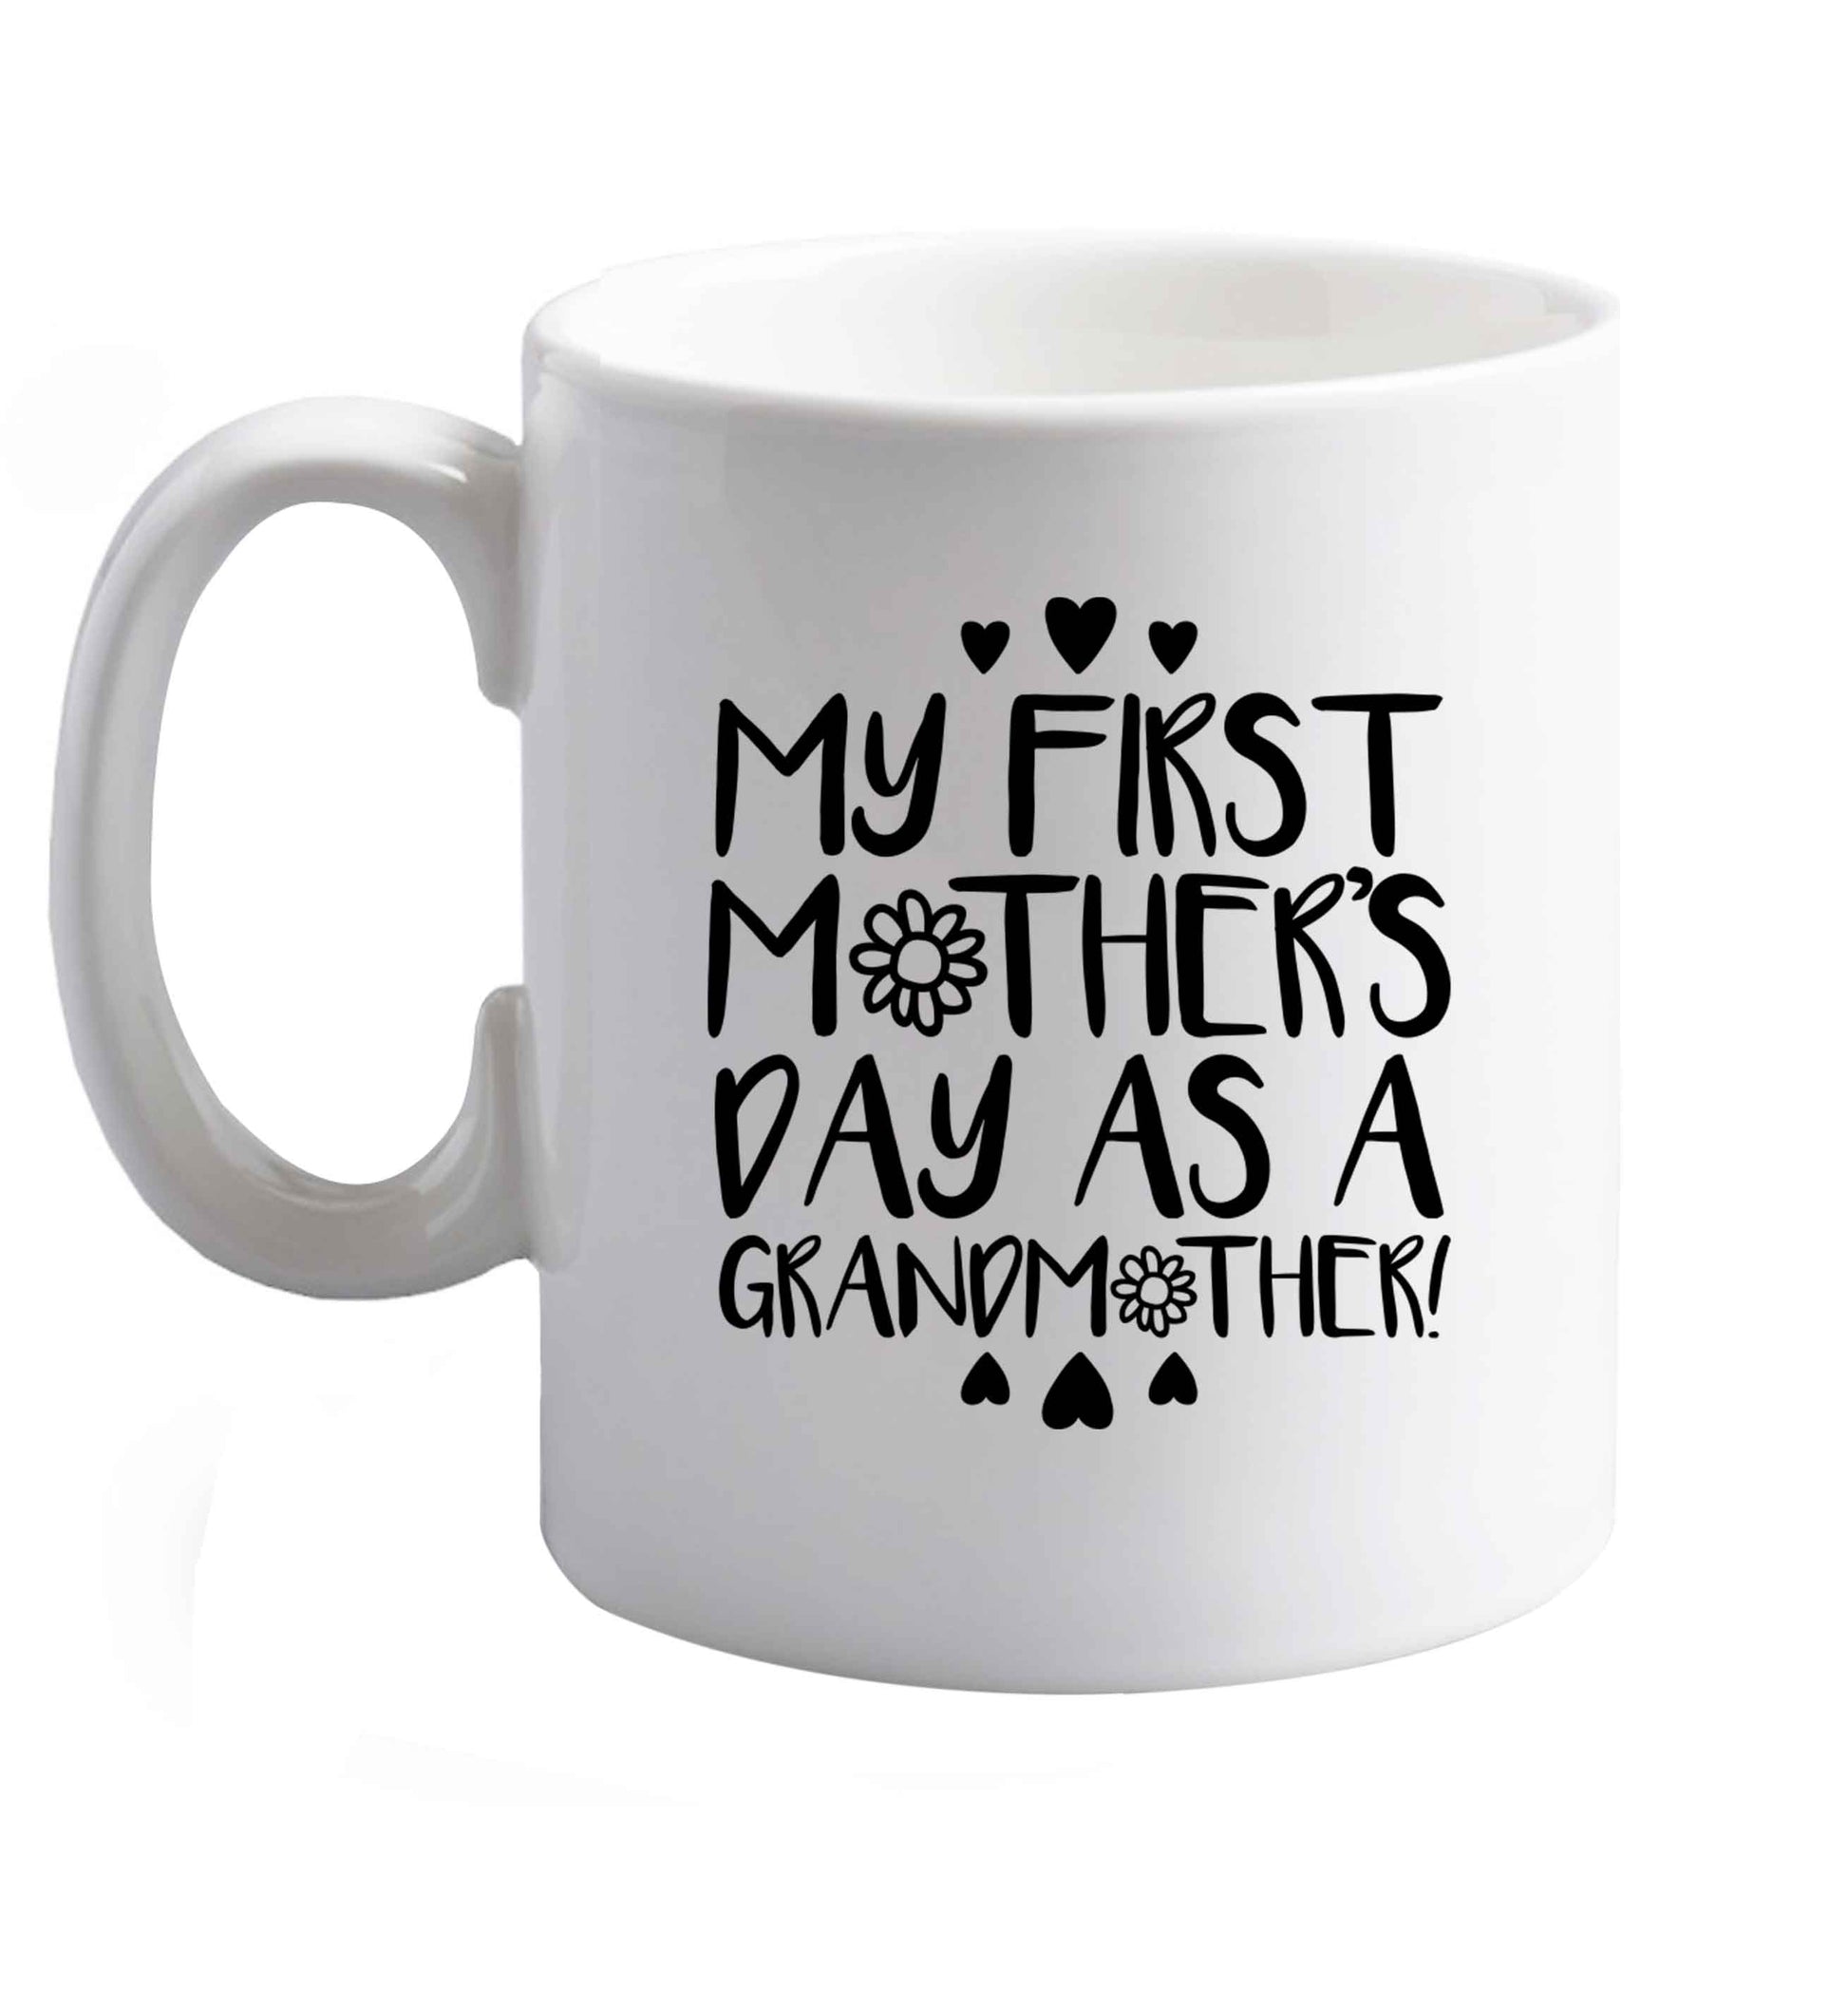 10 oz It's my first mother's day as a grandmother ceramic mug right handed